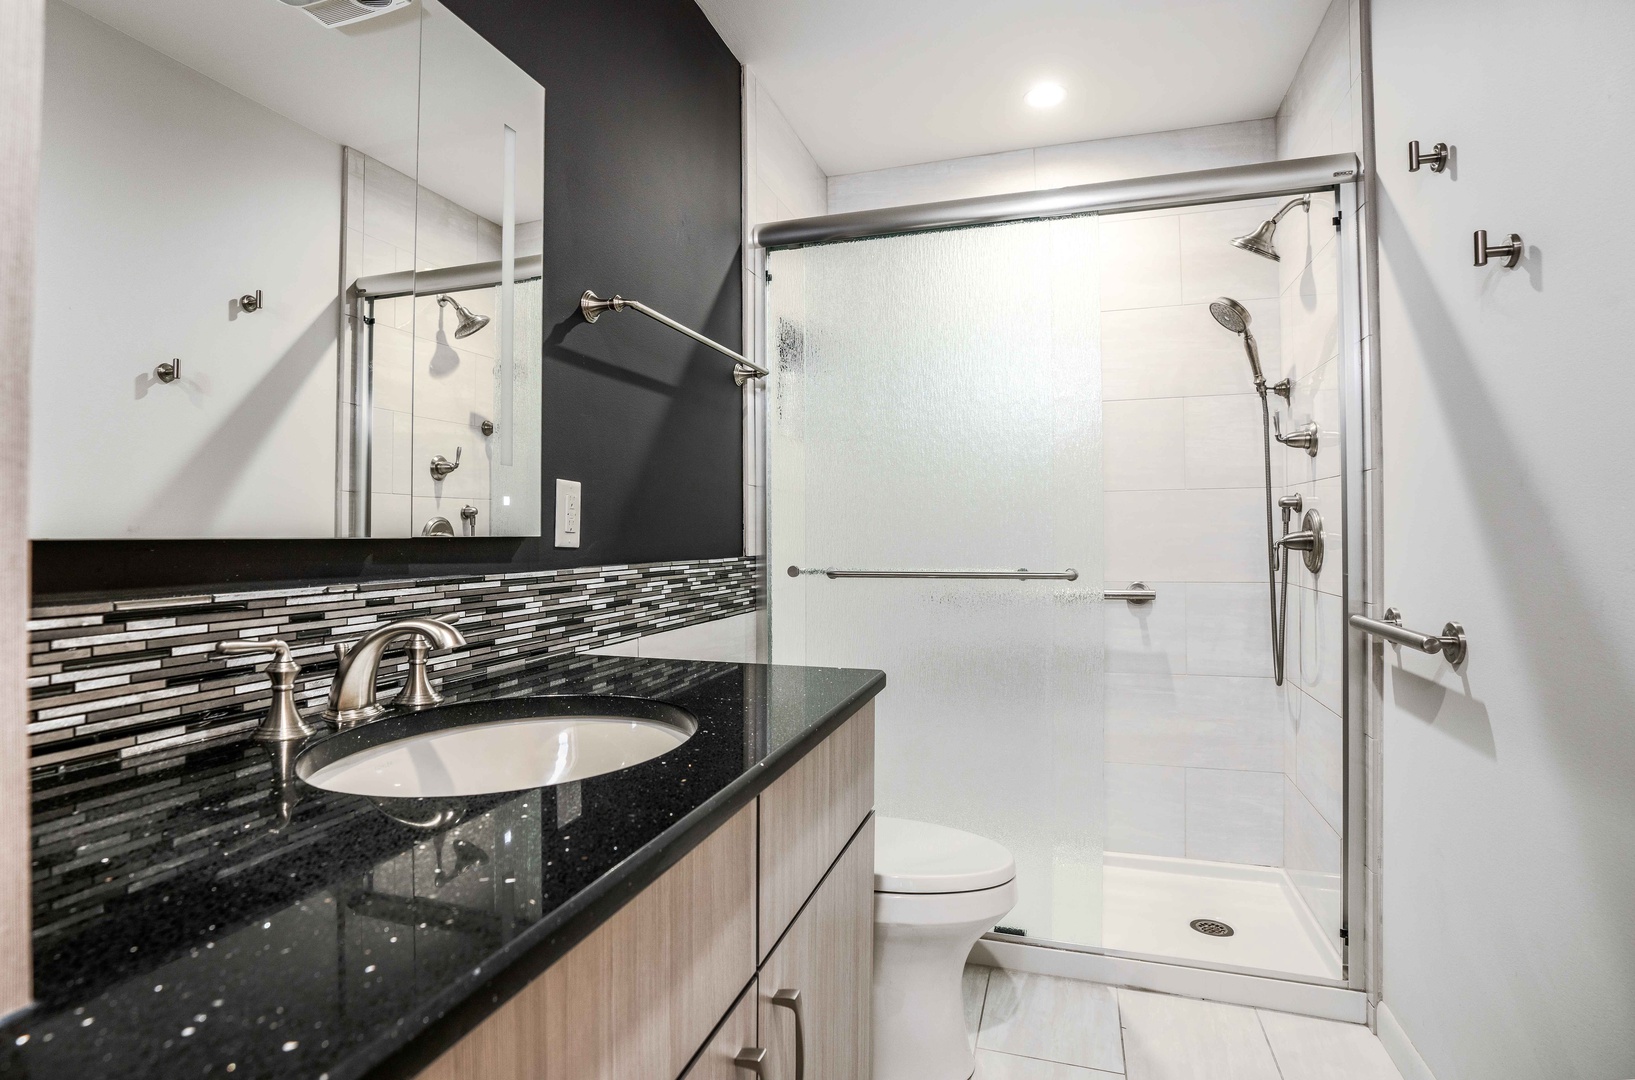 The king ensuite boasts a single vanity and glass shower